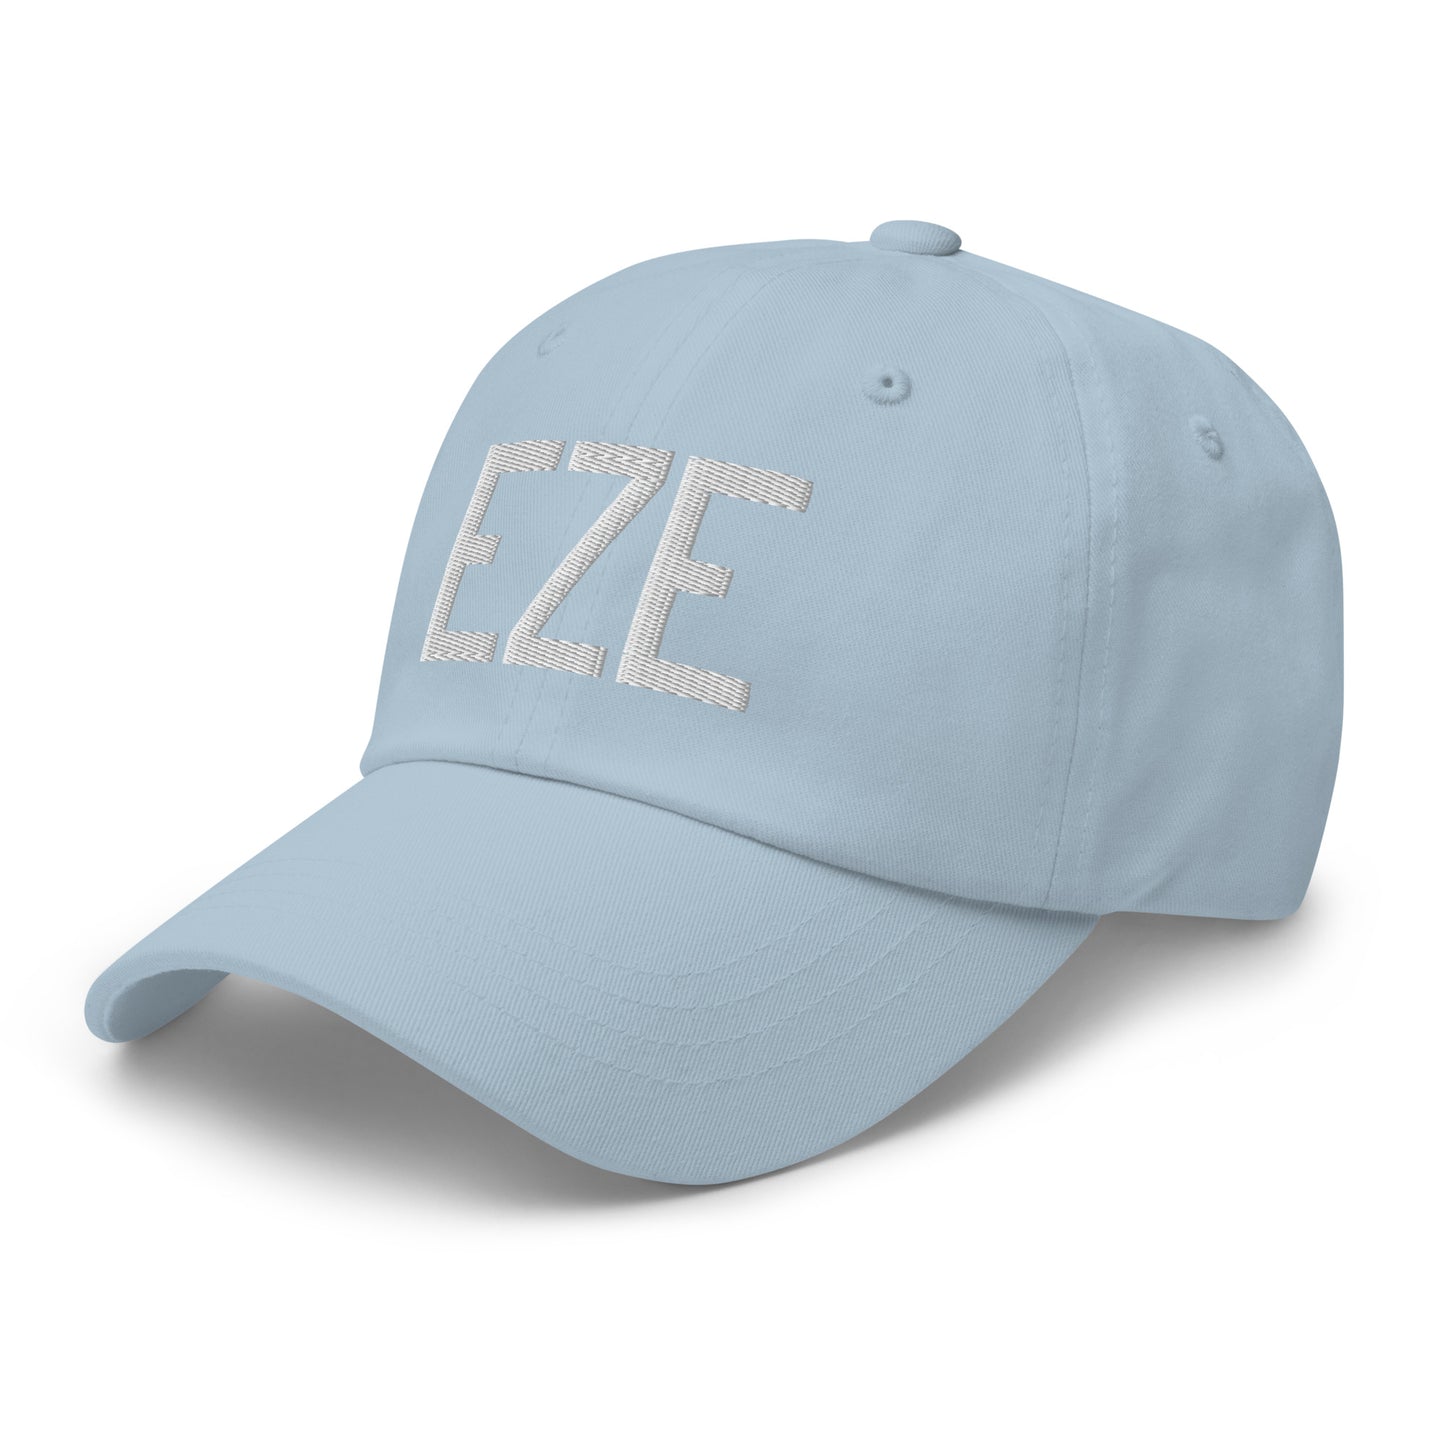 Airport Code Baseball Cap - White • EZE Buenos Aires • YHM Designs - Image 30